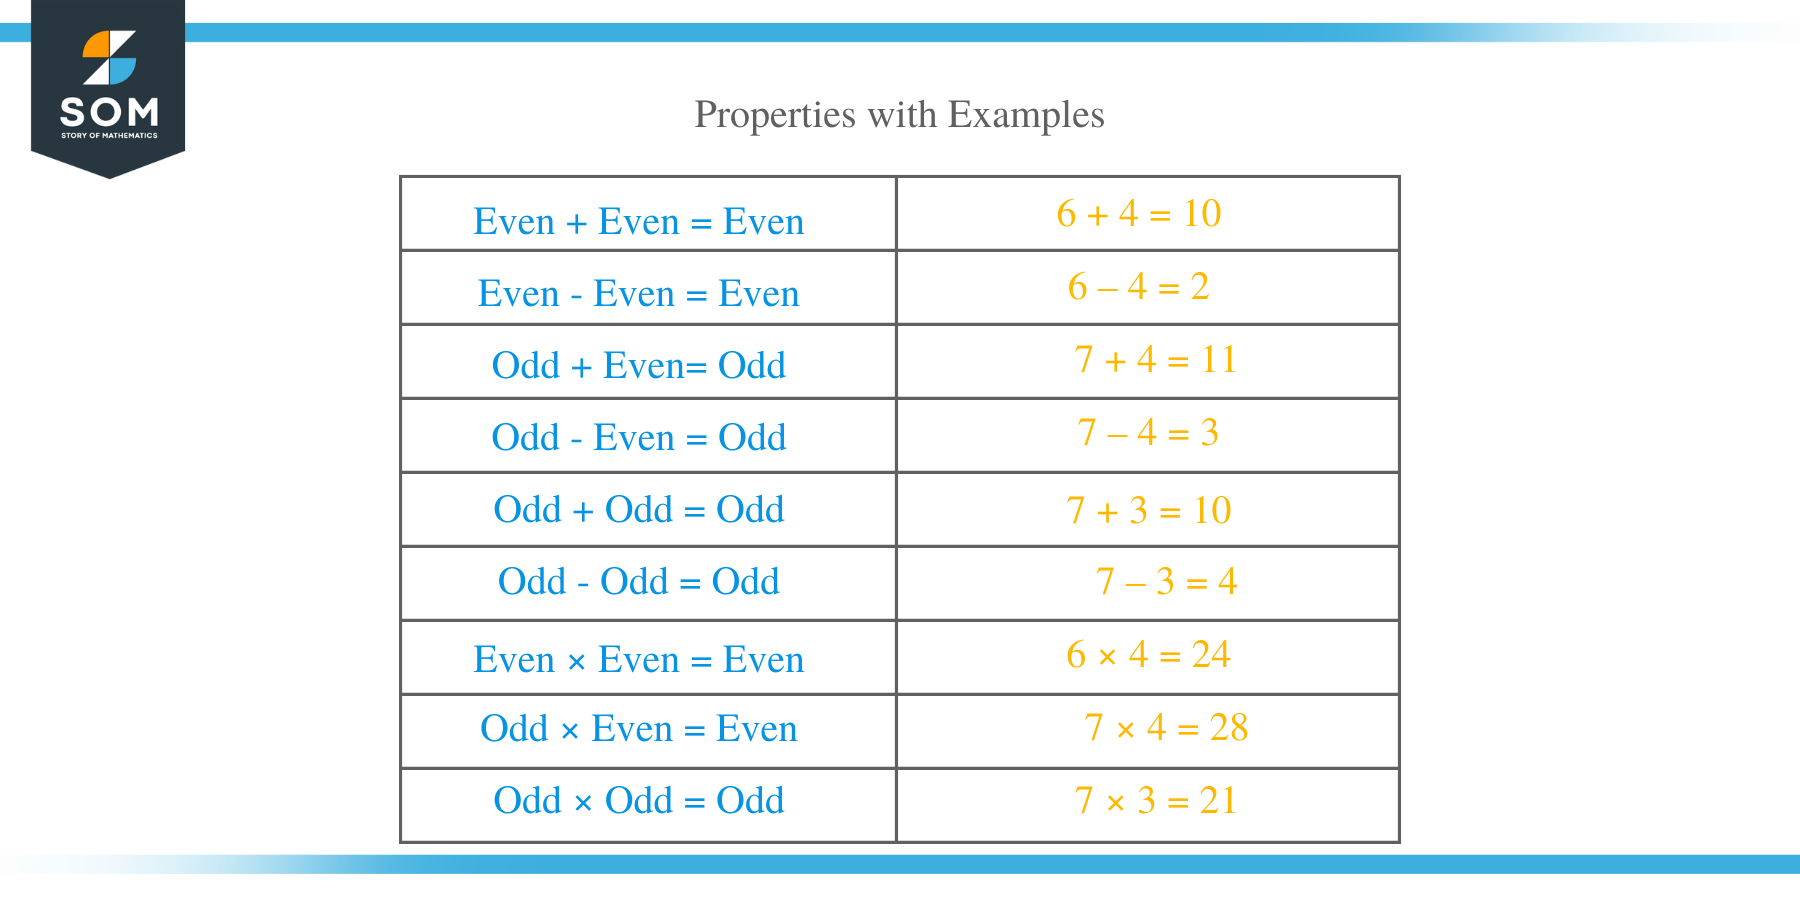 Properties of Odd and Even numbers